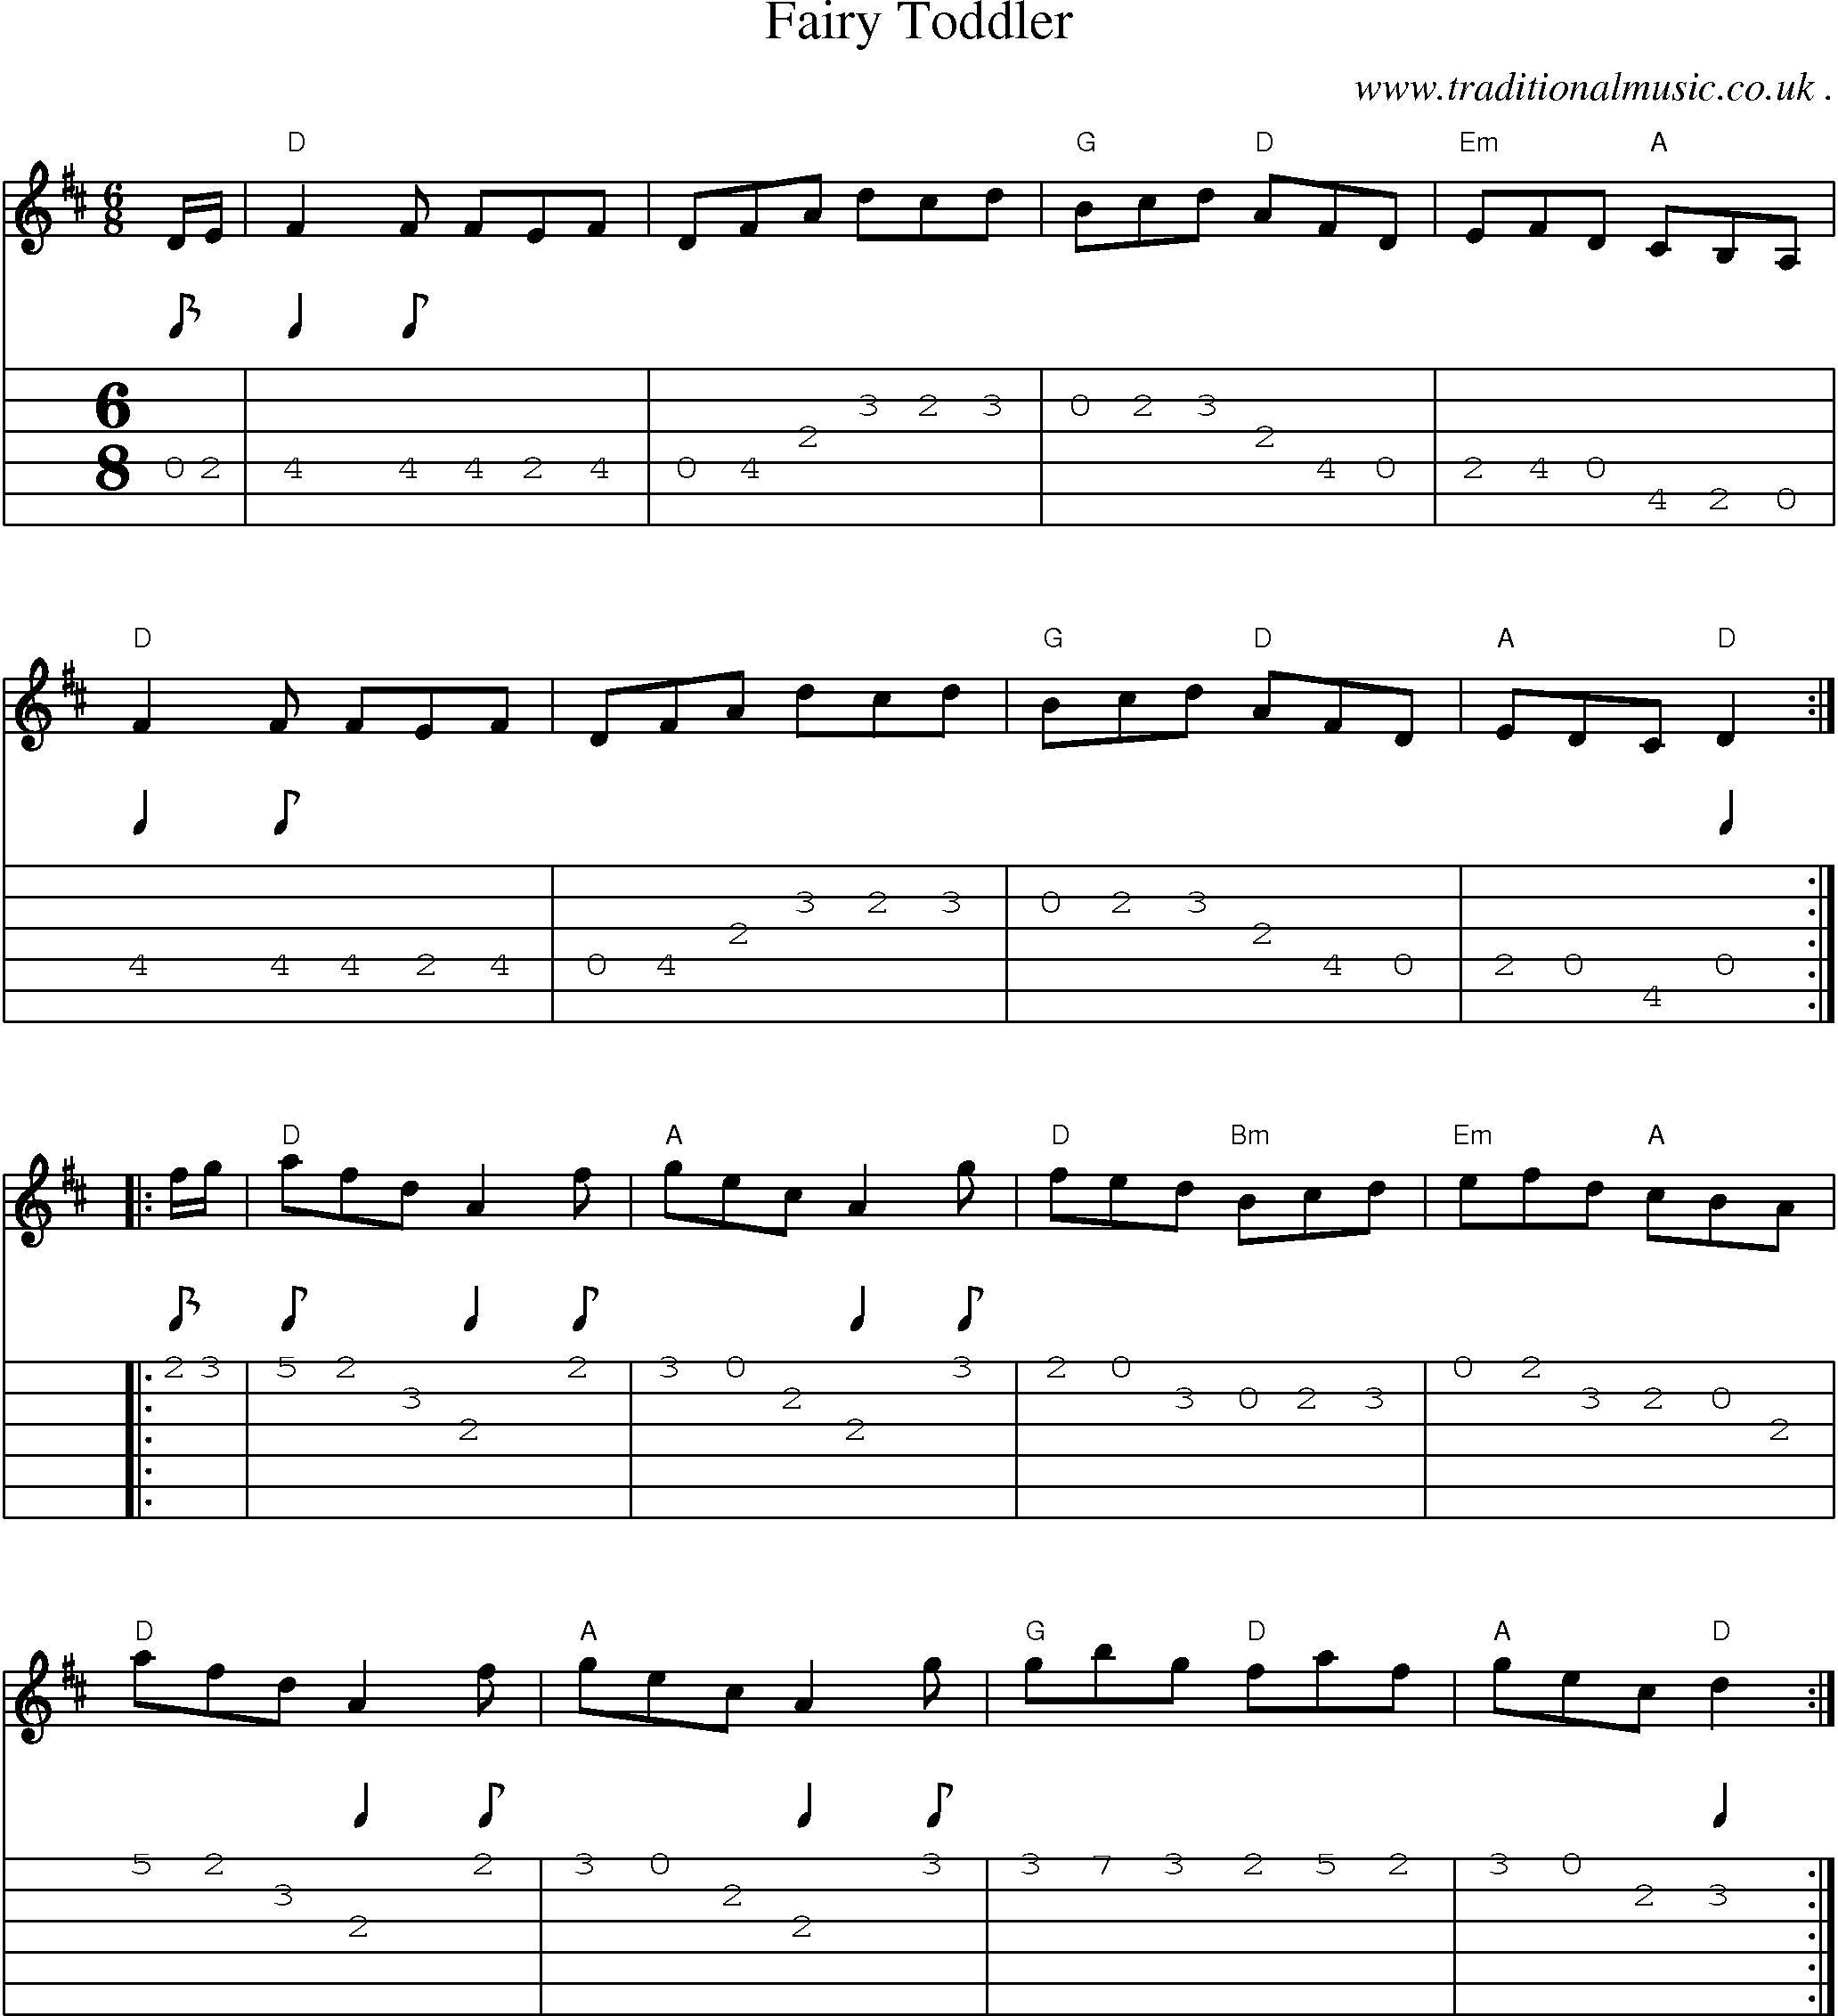 Sheet-music  score, Chords and Guitar Tabs for Fairy Toddler